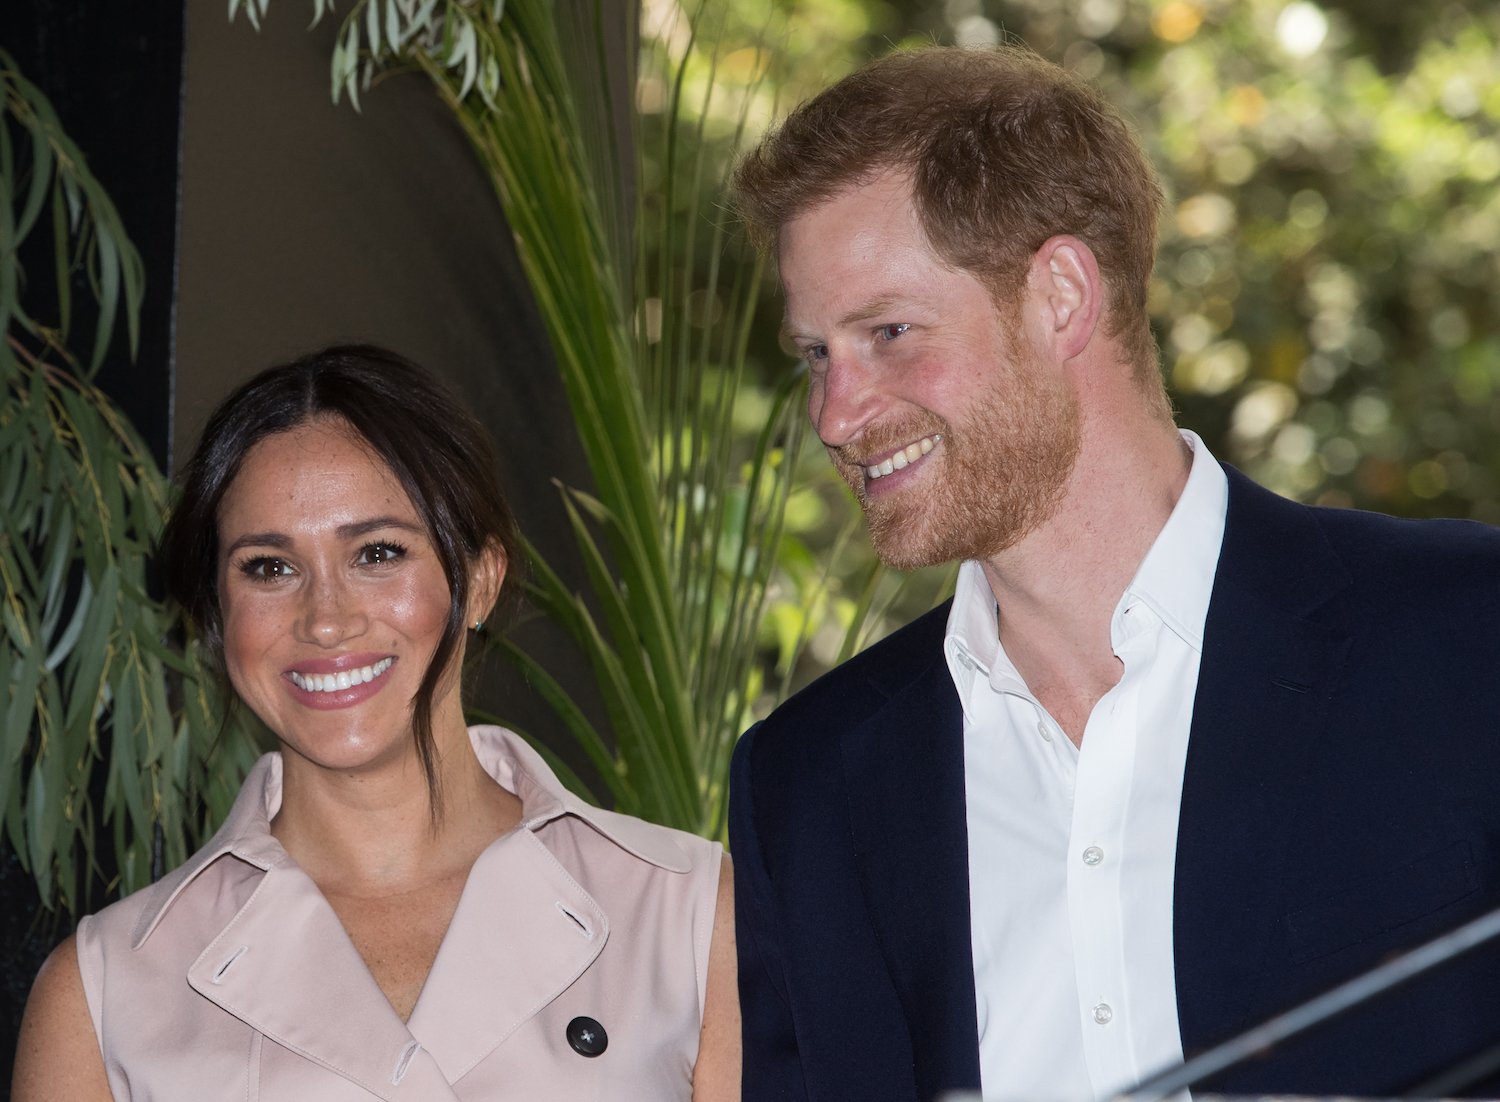 Prince Harry and Meghan Markle at a business reception at the British High Commissioner’s Residence in  Johannesburg, South Africa